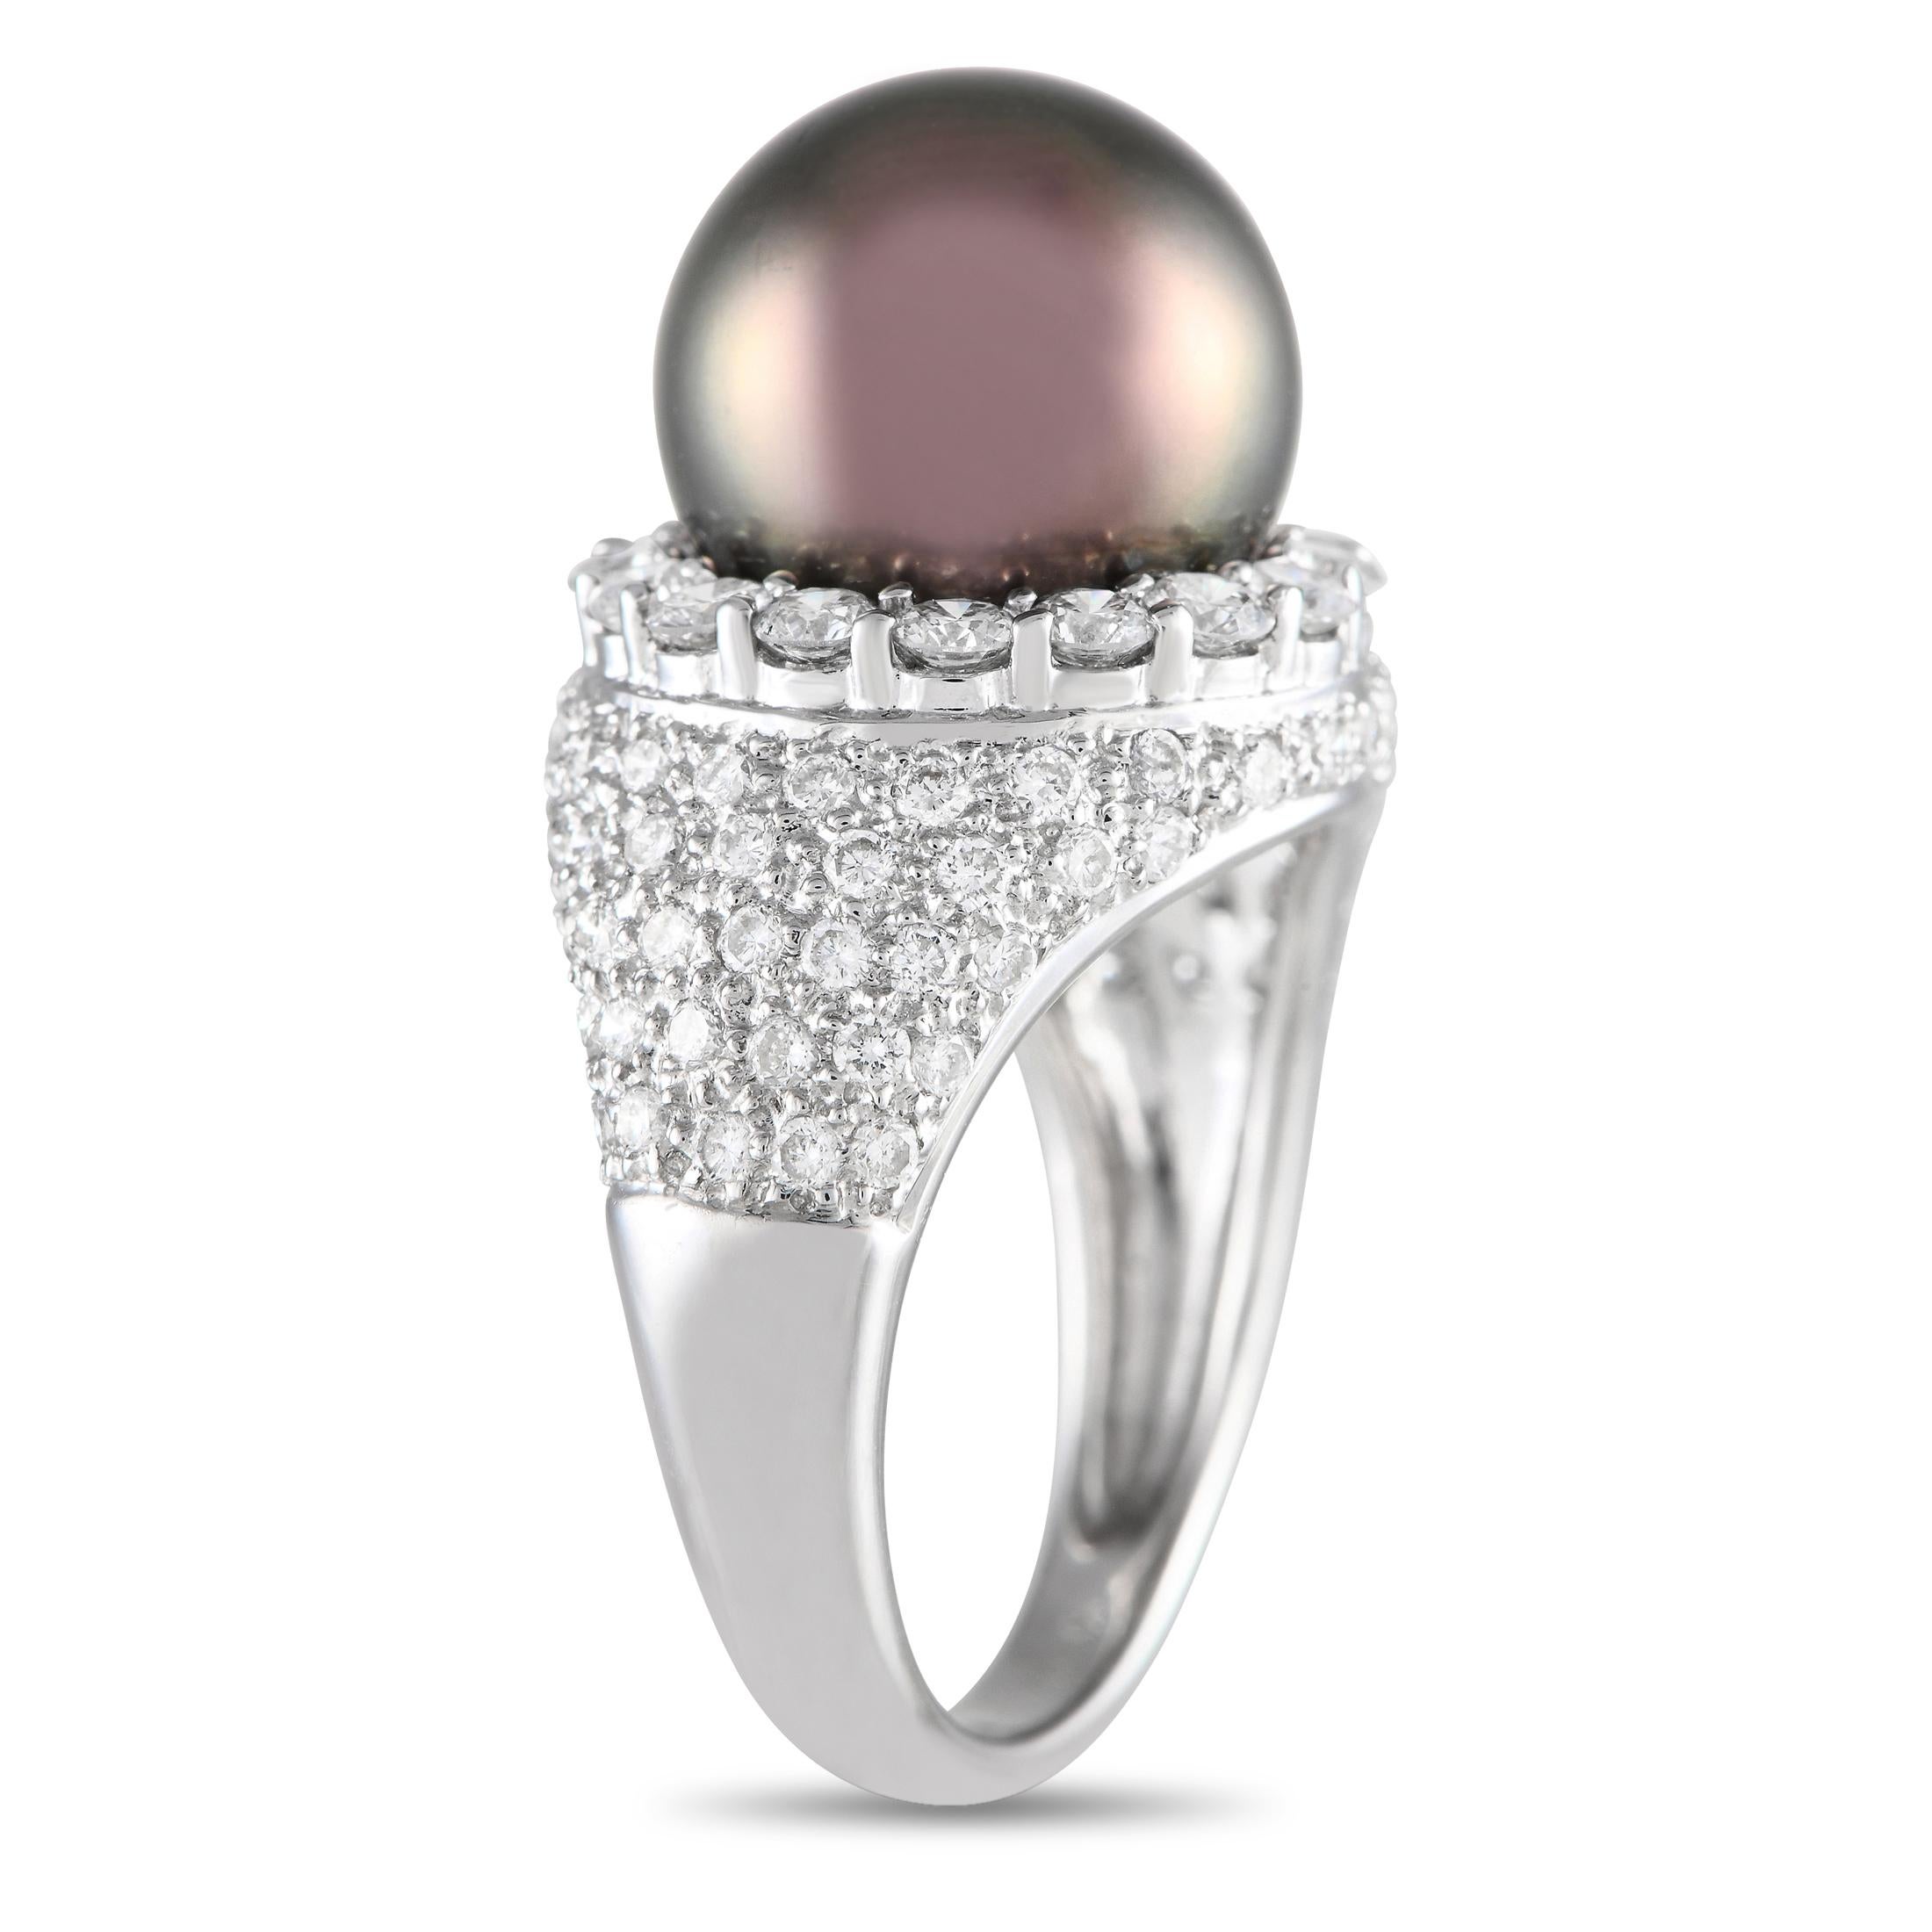 This ring is sure to have heads swiveling. Presented in 18K white gold, the band has a tapering profile, a polished finish on the bottom shank, and a wide, pav-set upper half. Nestled on a bed of 1.72 carats of diamonds is an 11.7mm pearl with a